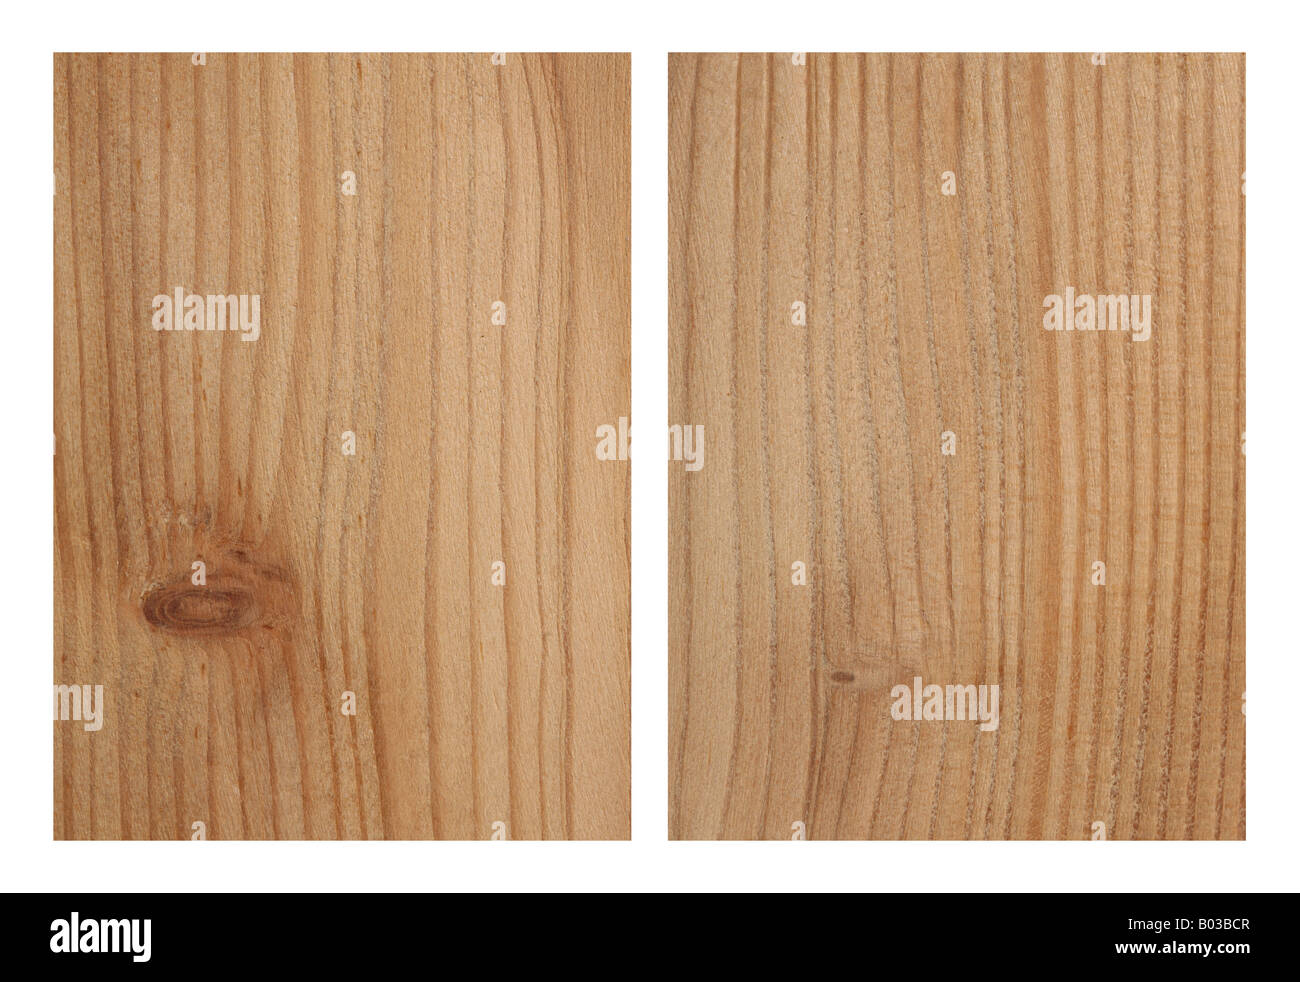 Larch Wood Plank Board Isolated on White Background.Two Larch Wood